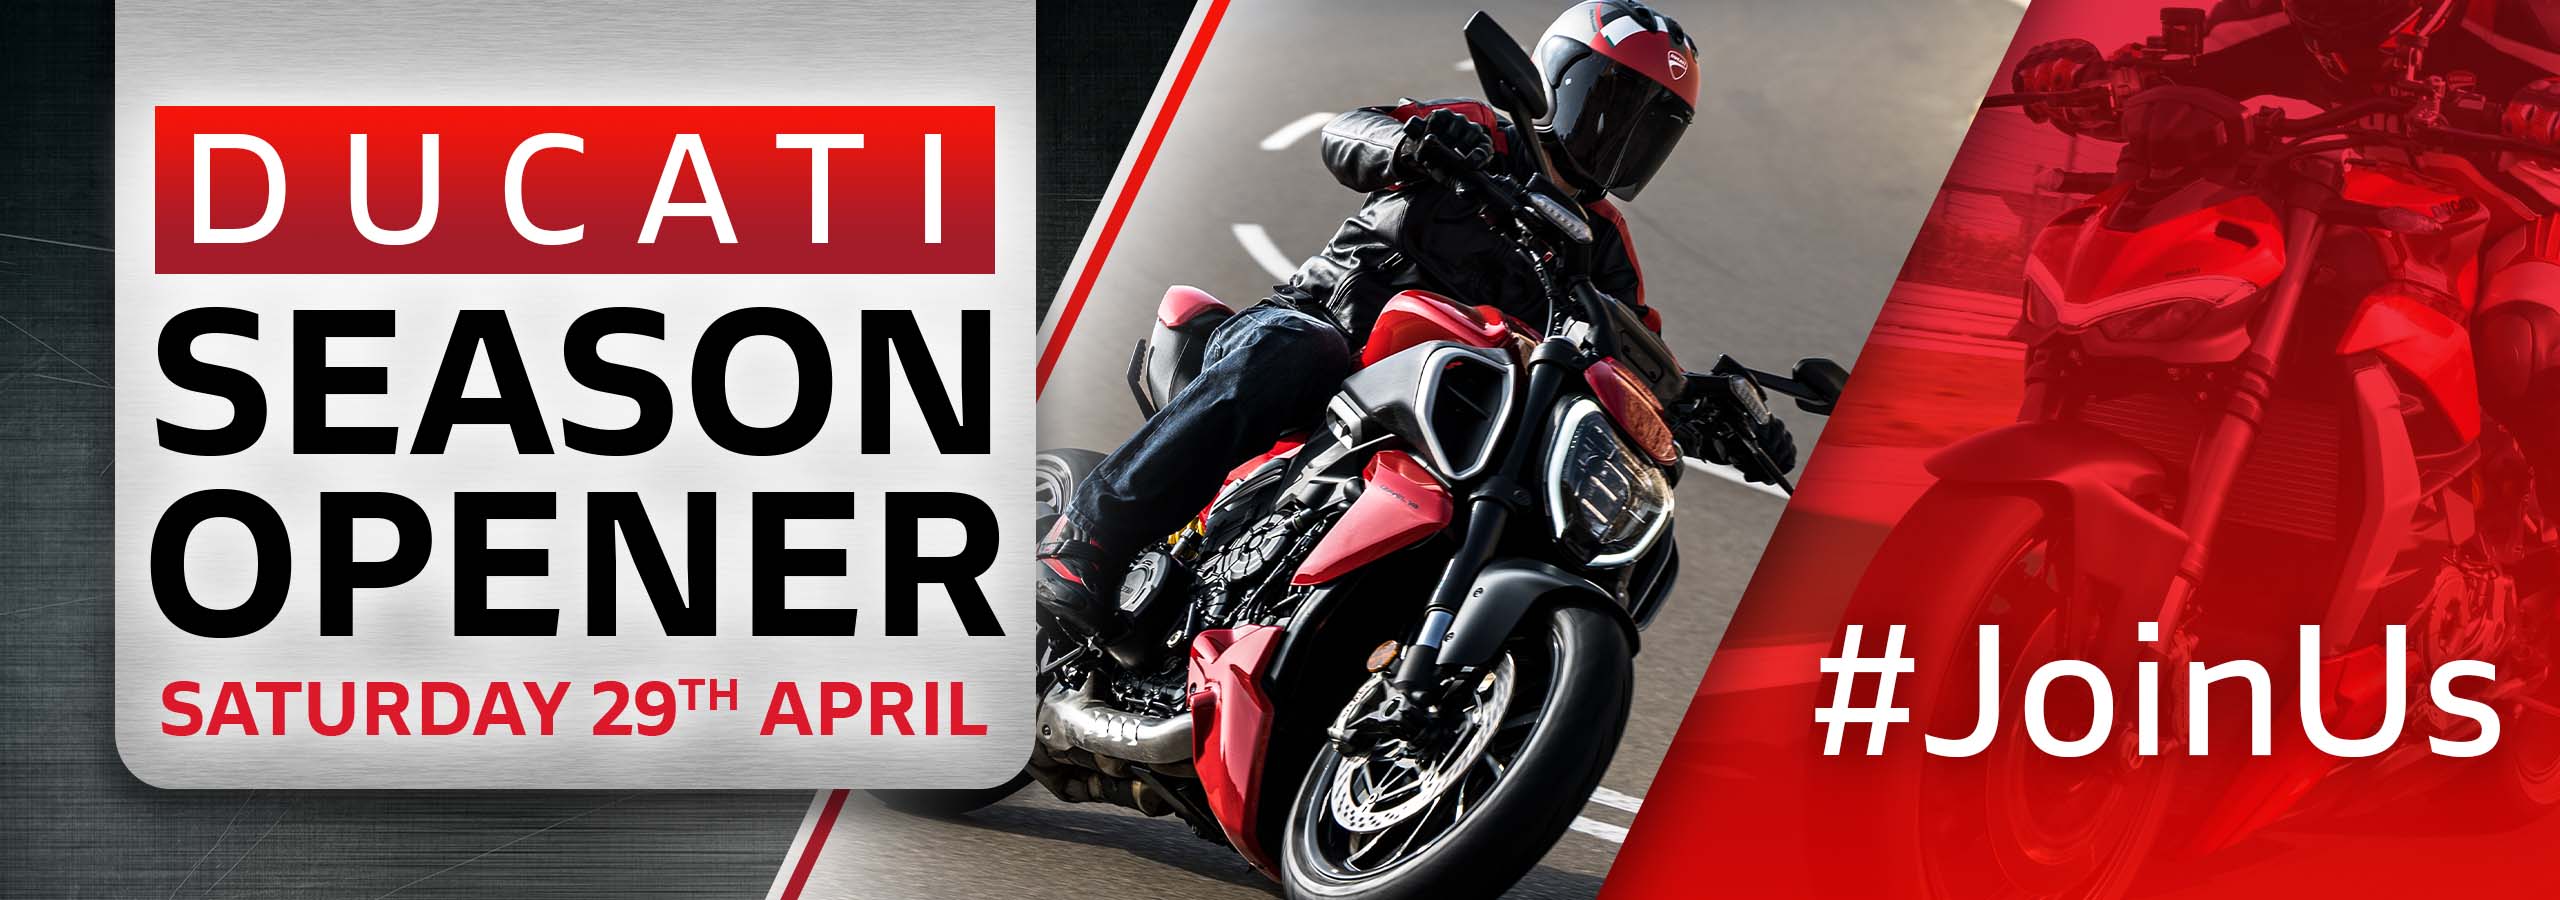 Join us at Laguna Motorcycles in Ashford for our Ducati Season Opener Event on Saturday the 29th of April!